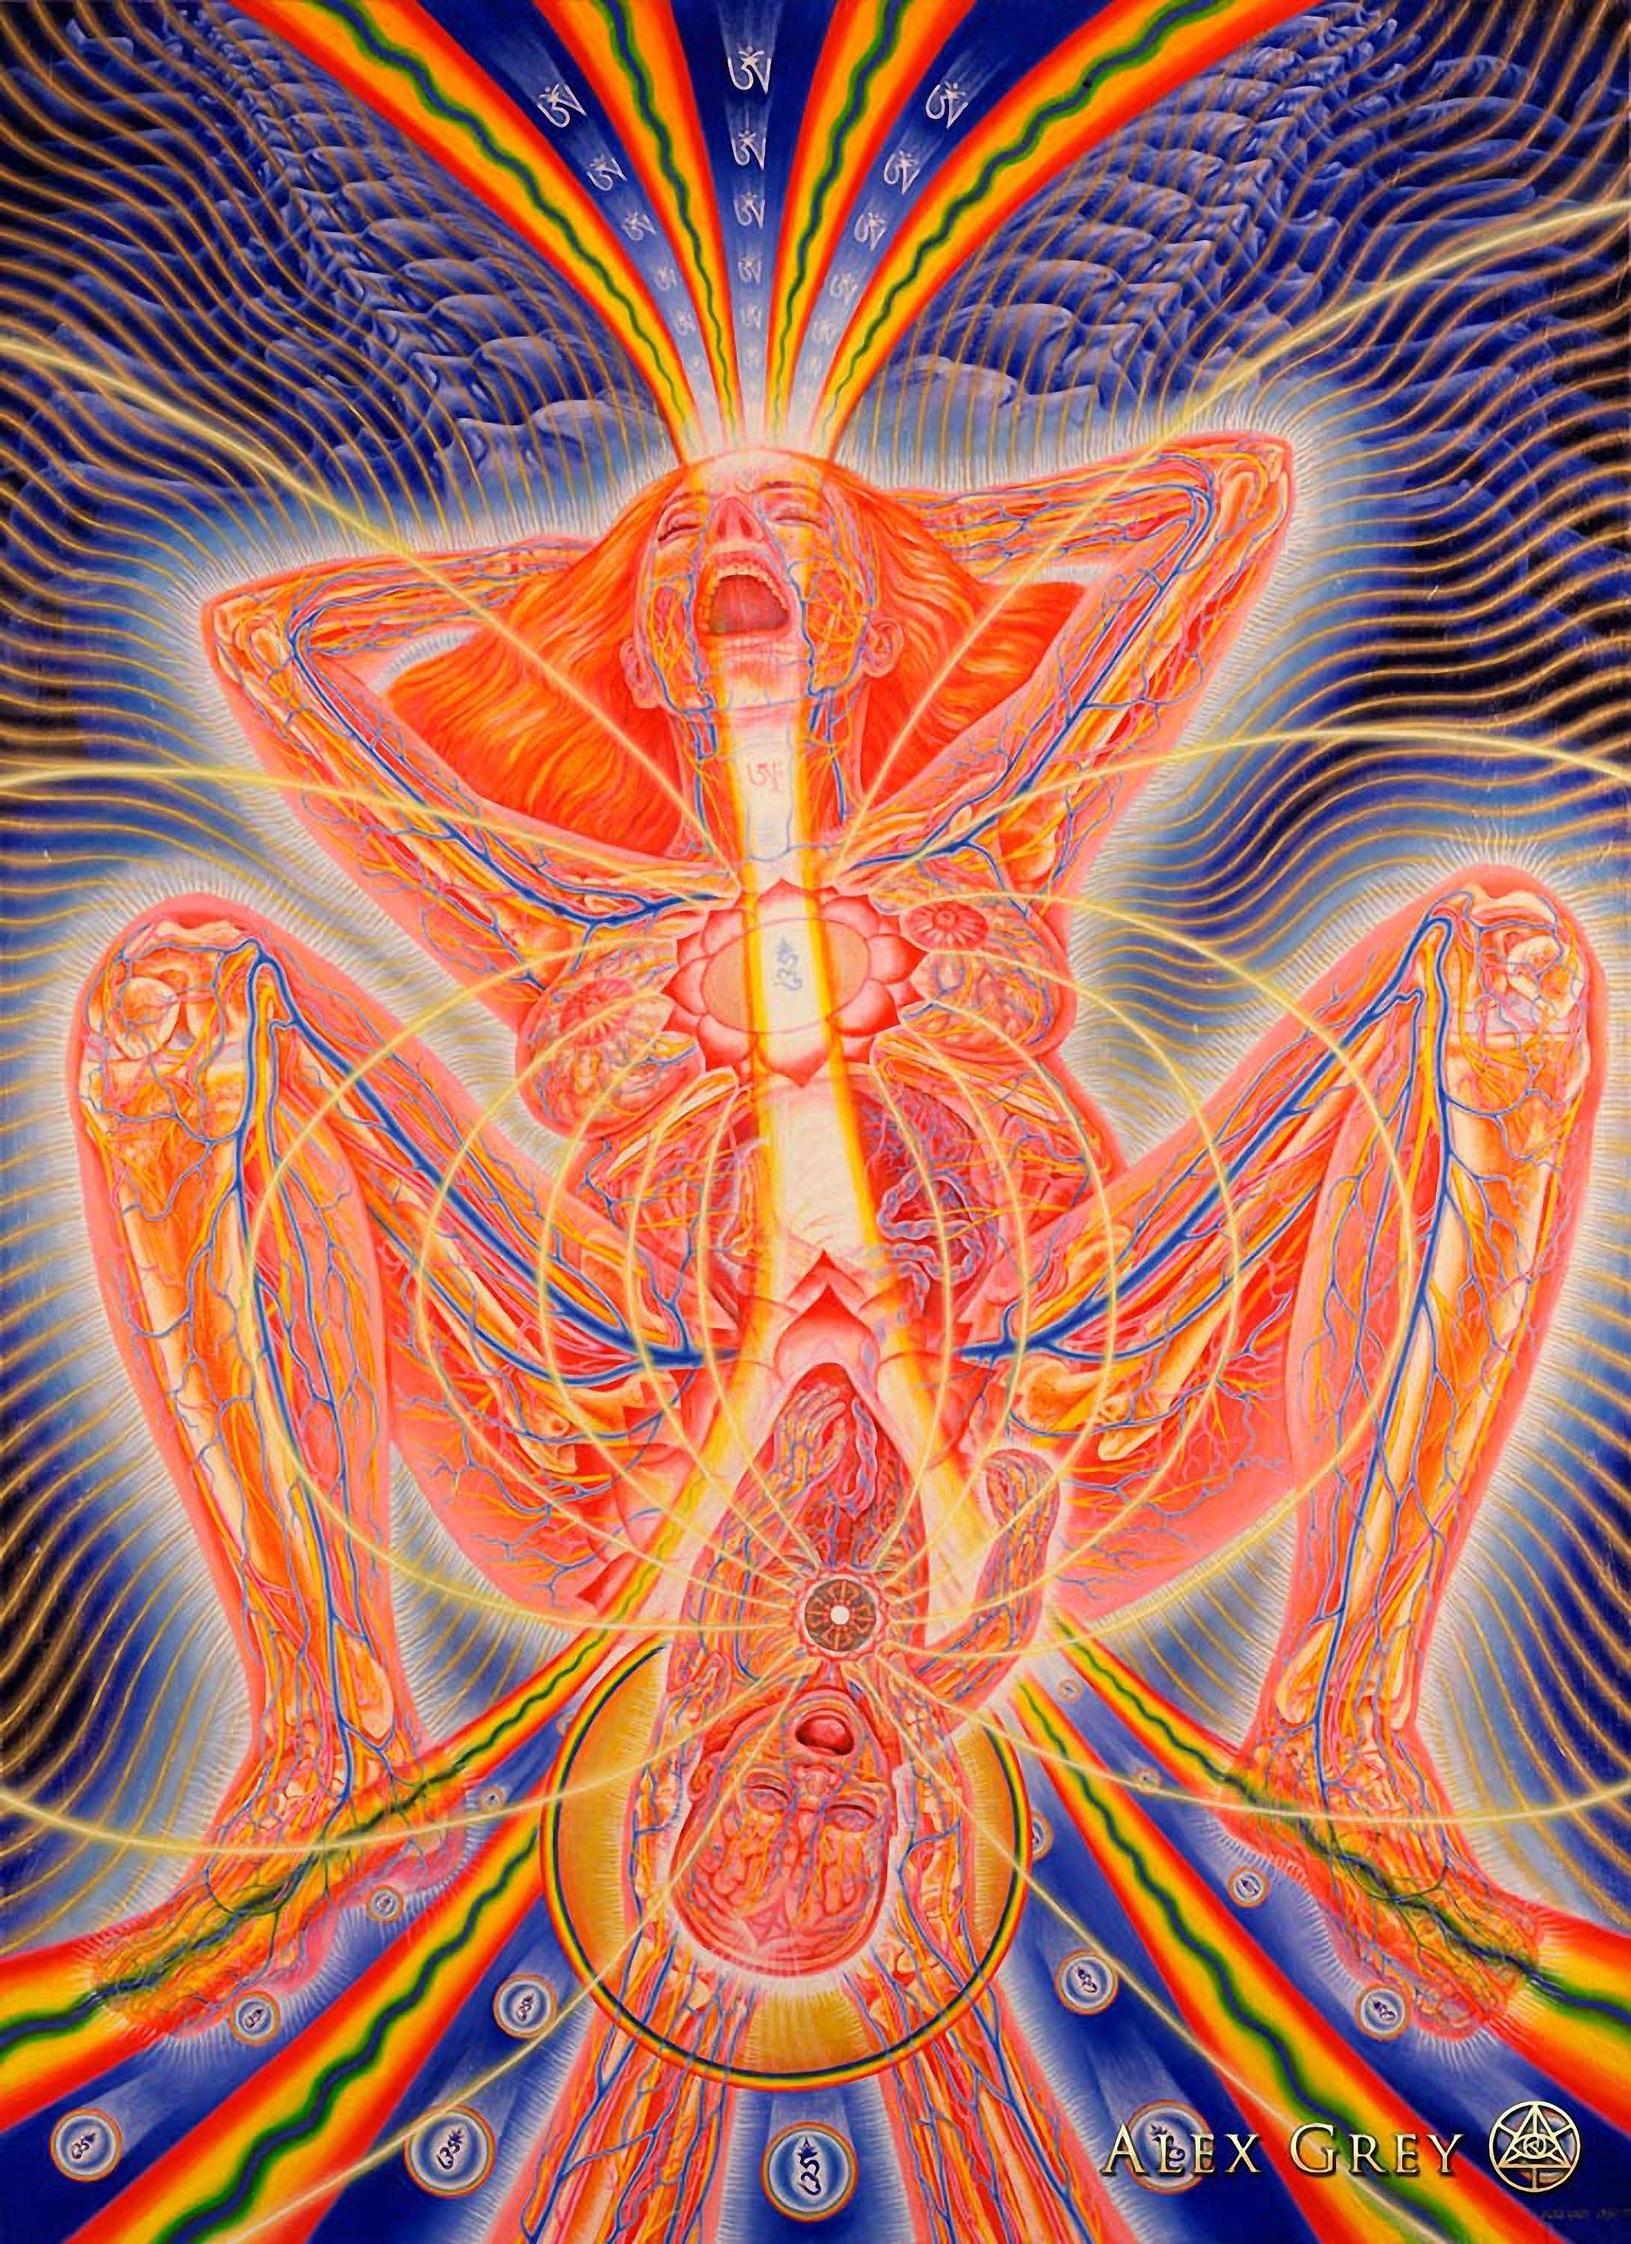 High Quality Album Of Alex Grey Paintings [50 Image]